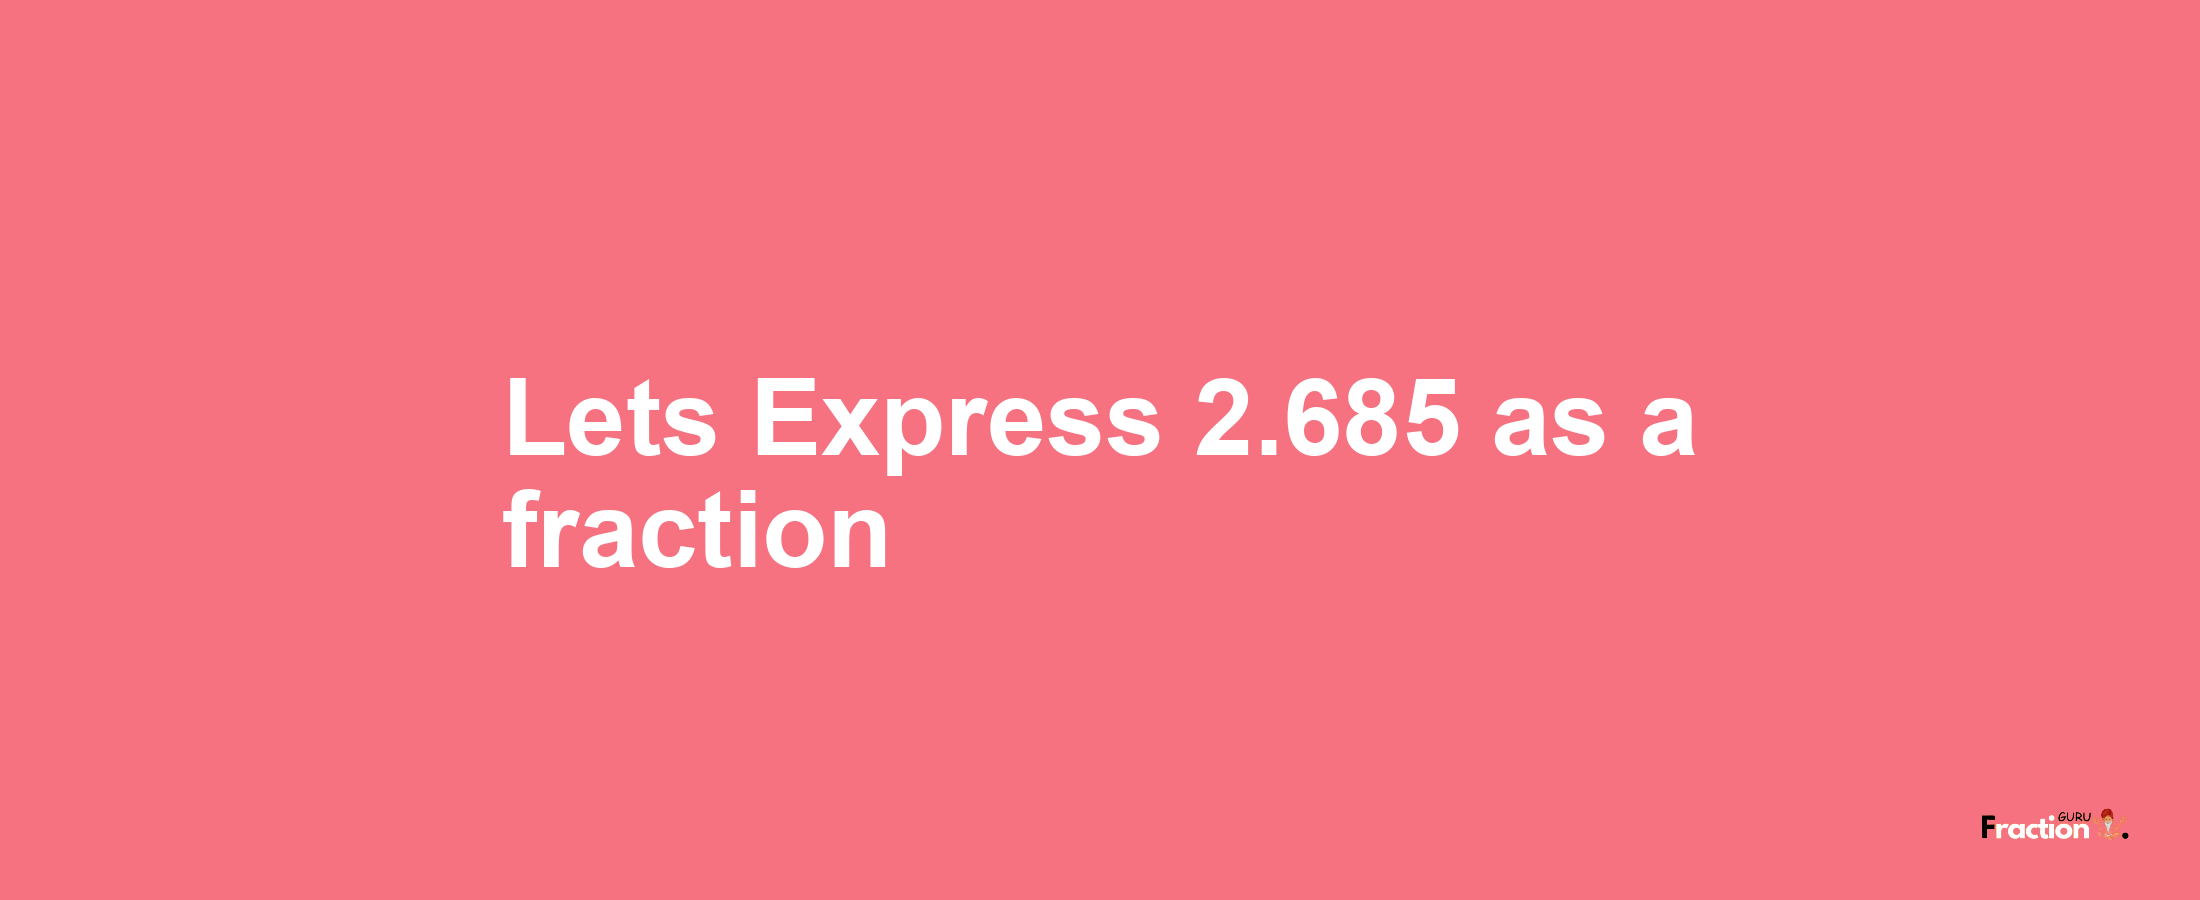 Lets Express 2.685 as afraction